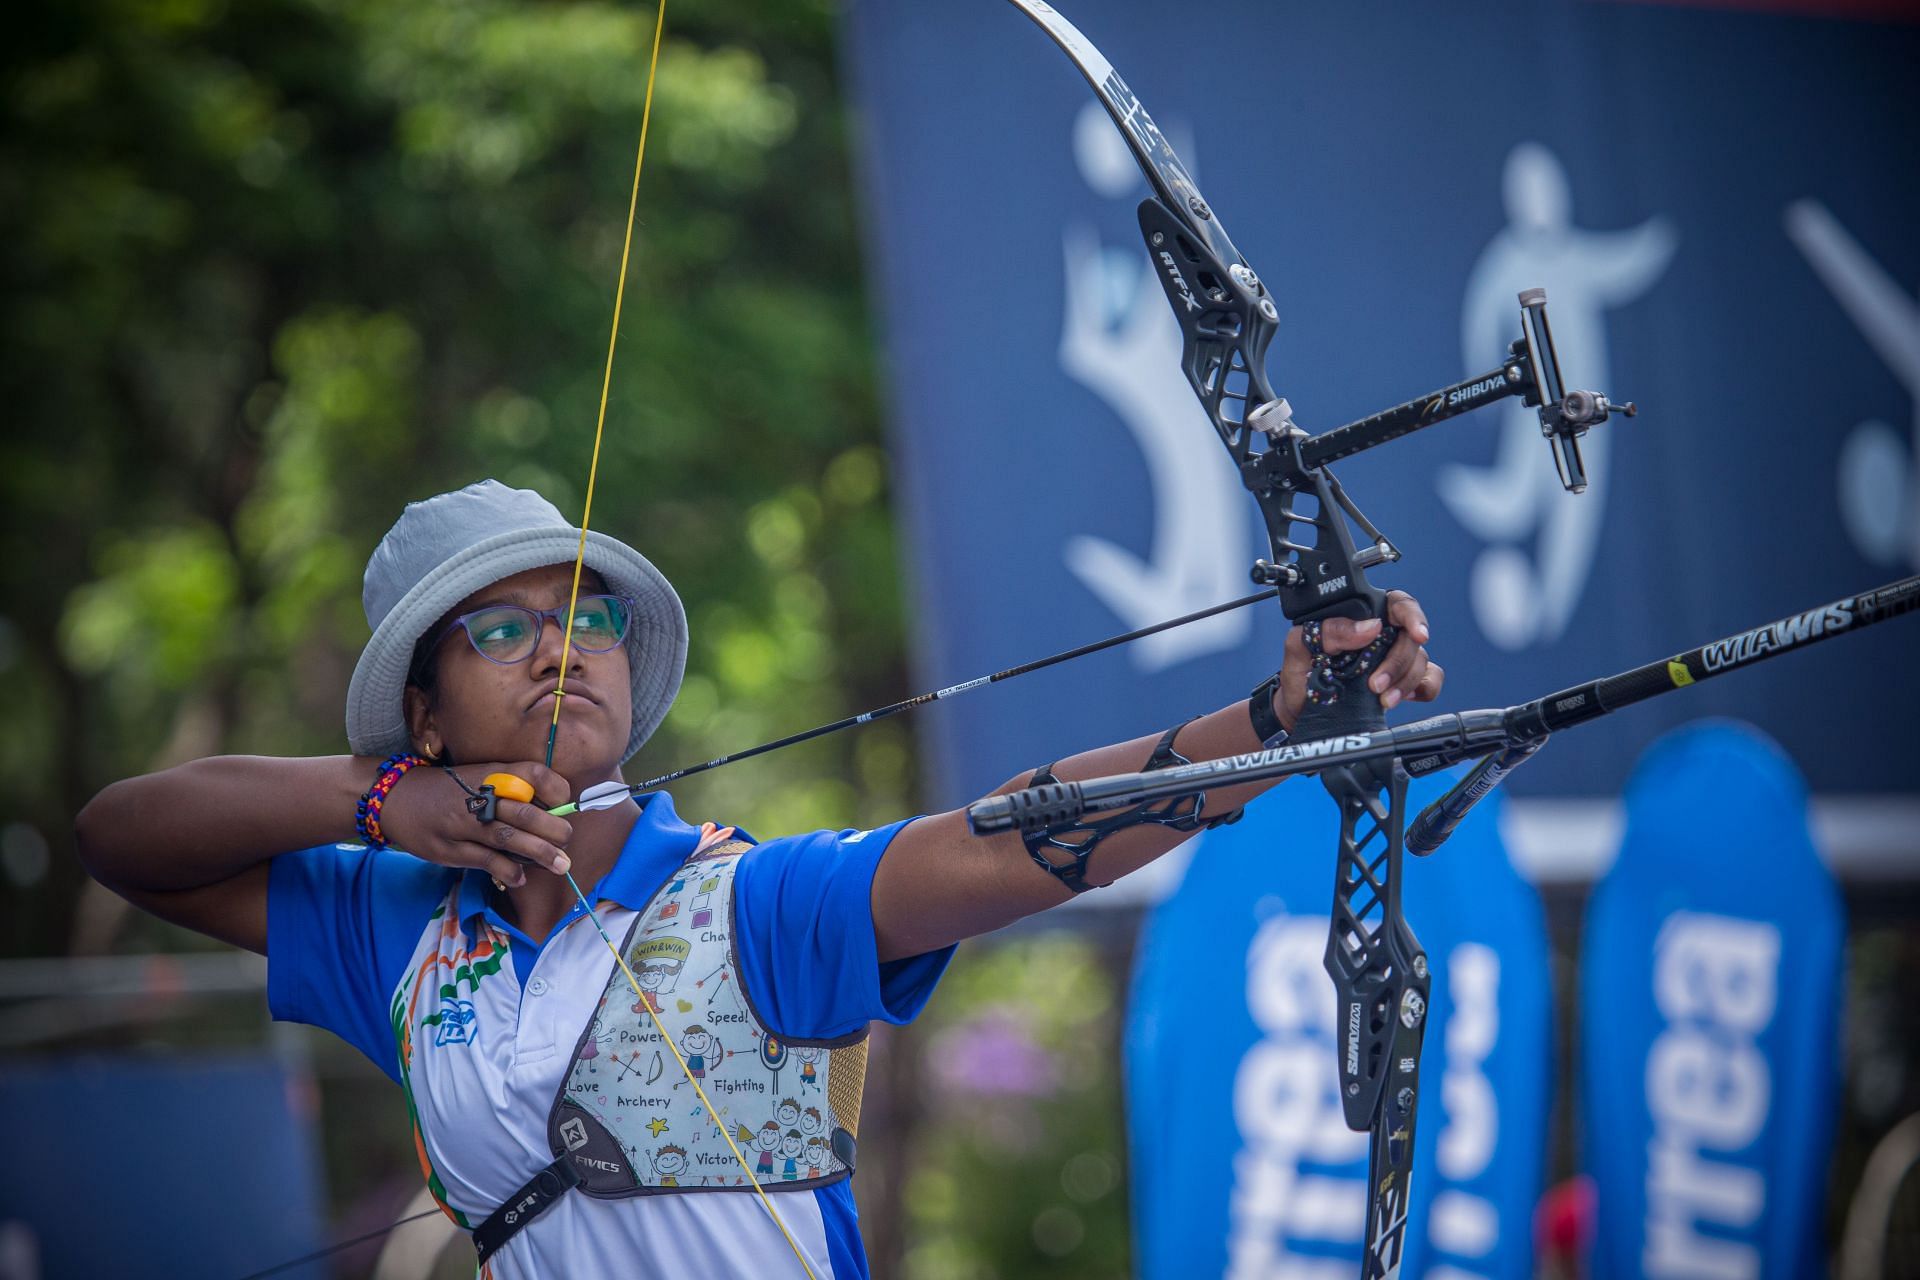 Action from Archery World Cup 2021 Stage 1 - Guatemala City 